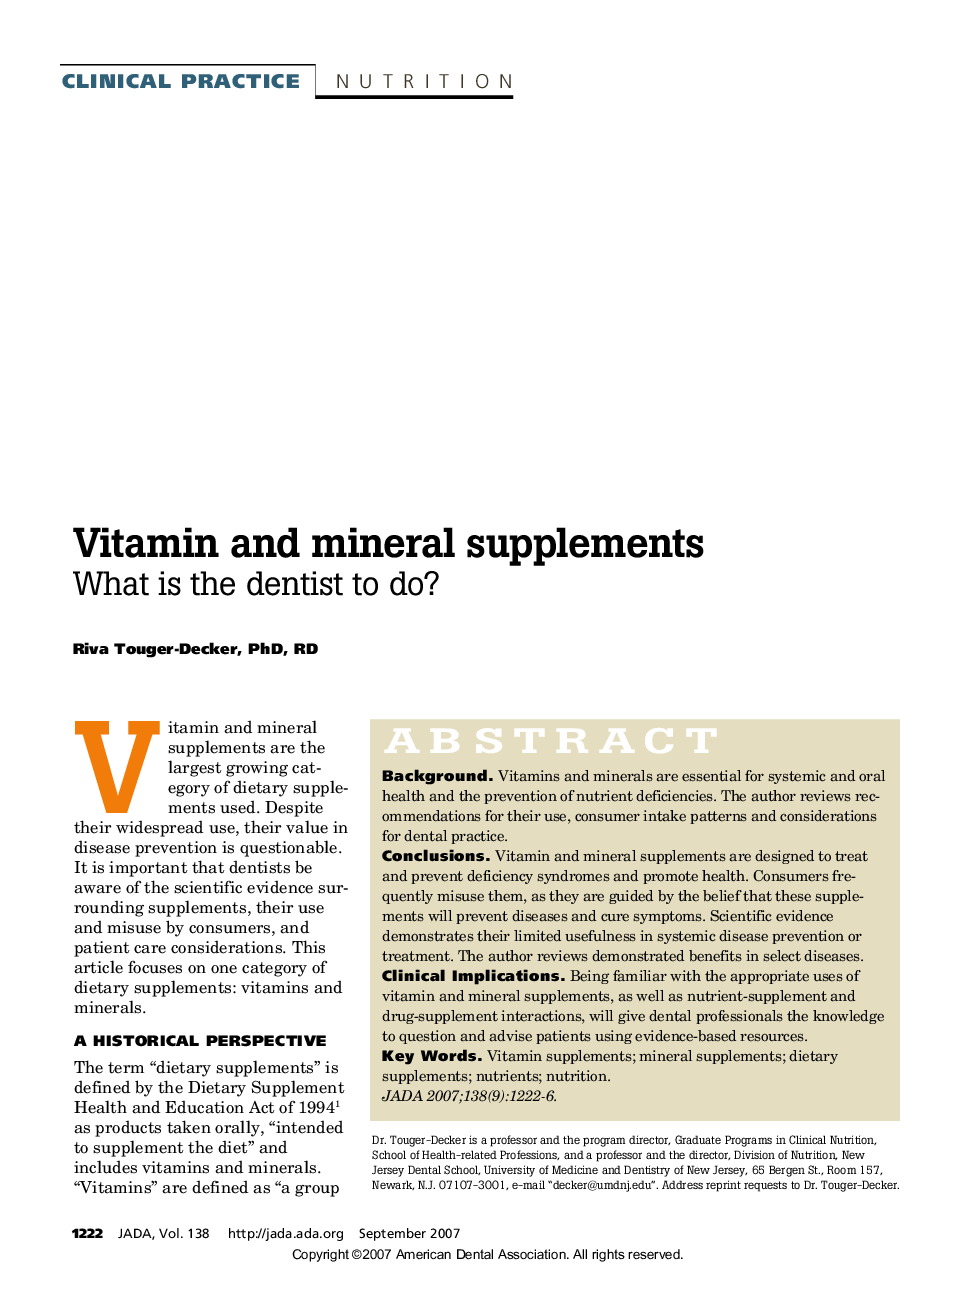 Vitamin and Mineral Supplements: What Is the Dentist to Do?